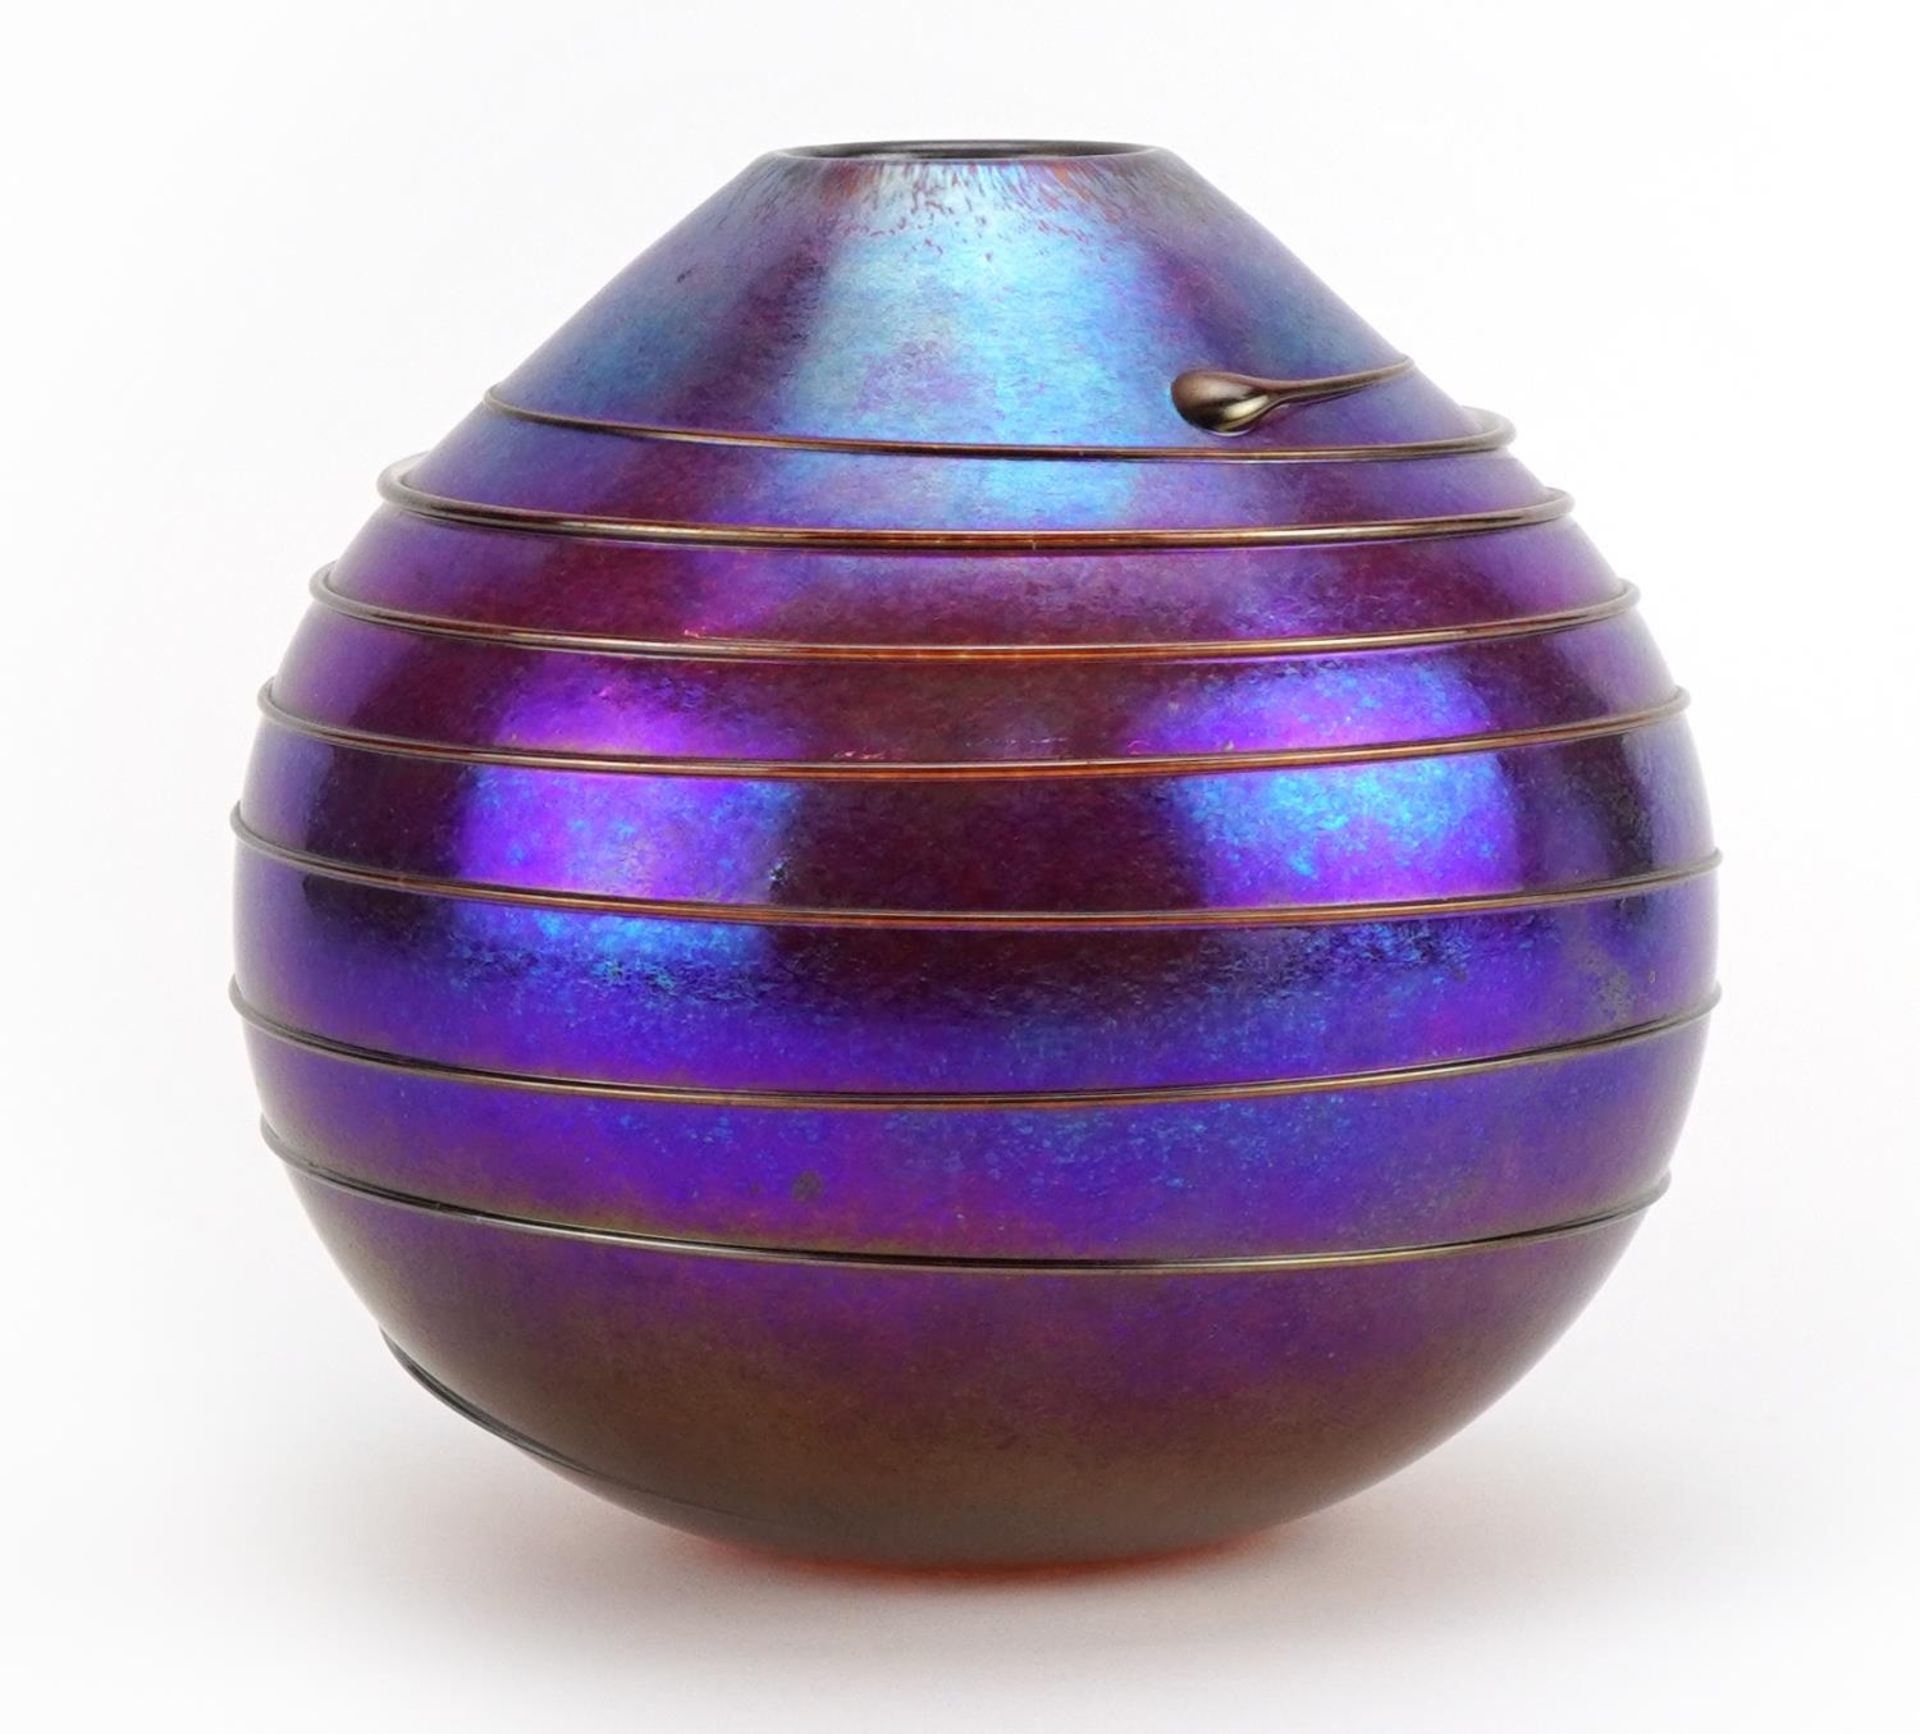 Siddy Langley, iridescent art glass vase with trailed decoration, etched Siddy Langley 2004 around